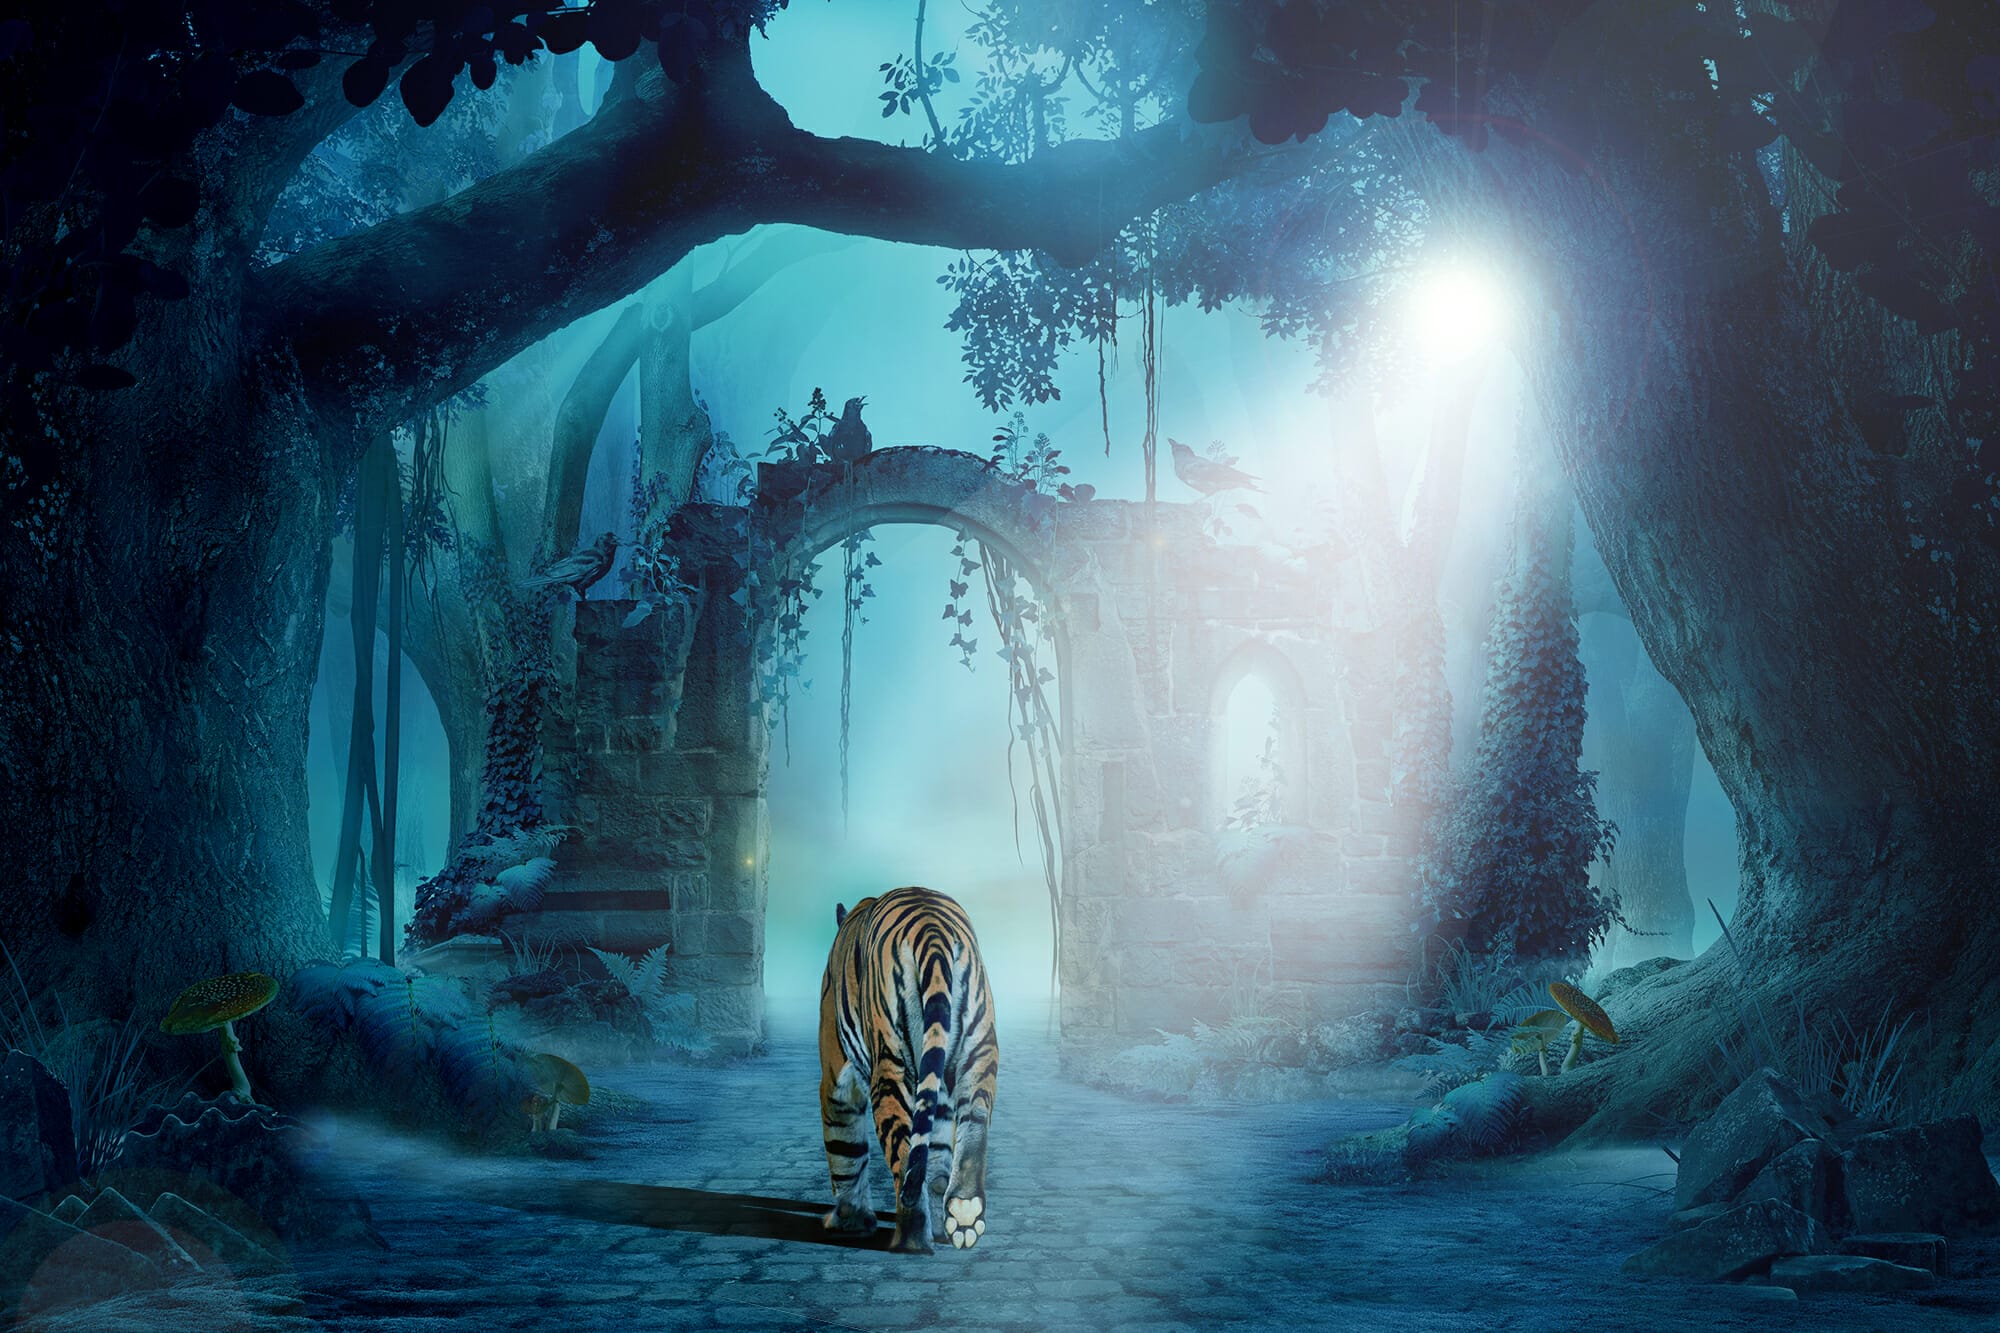 Tiger in the moonlight in a forest